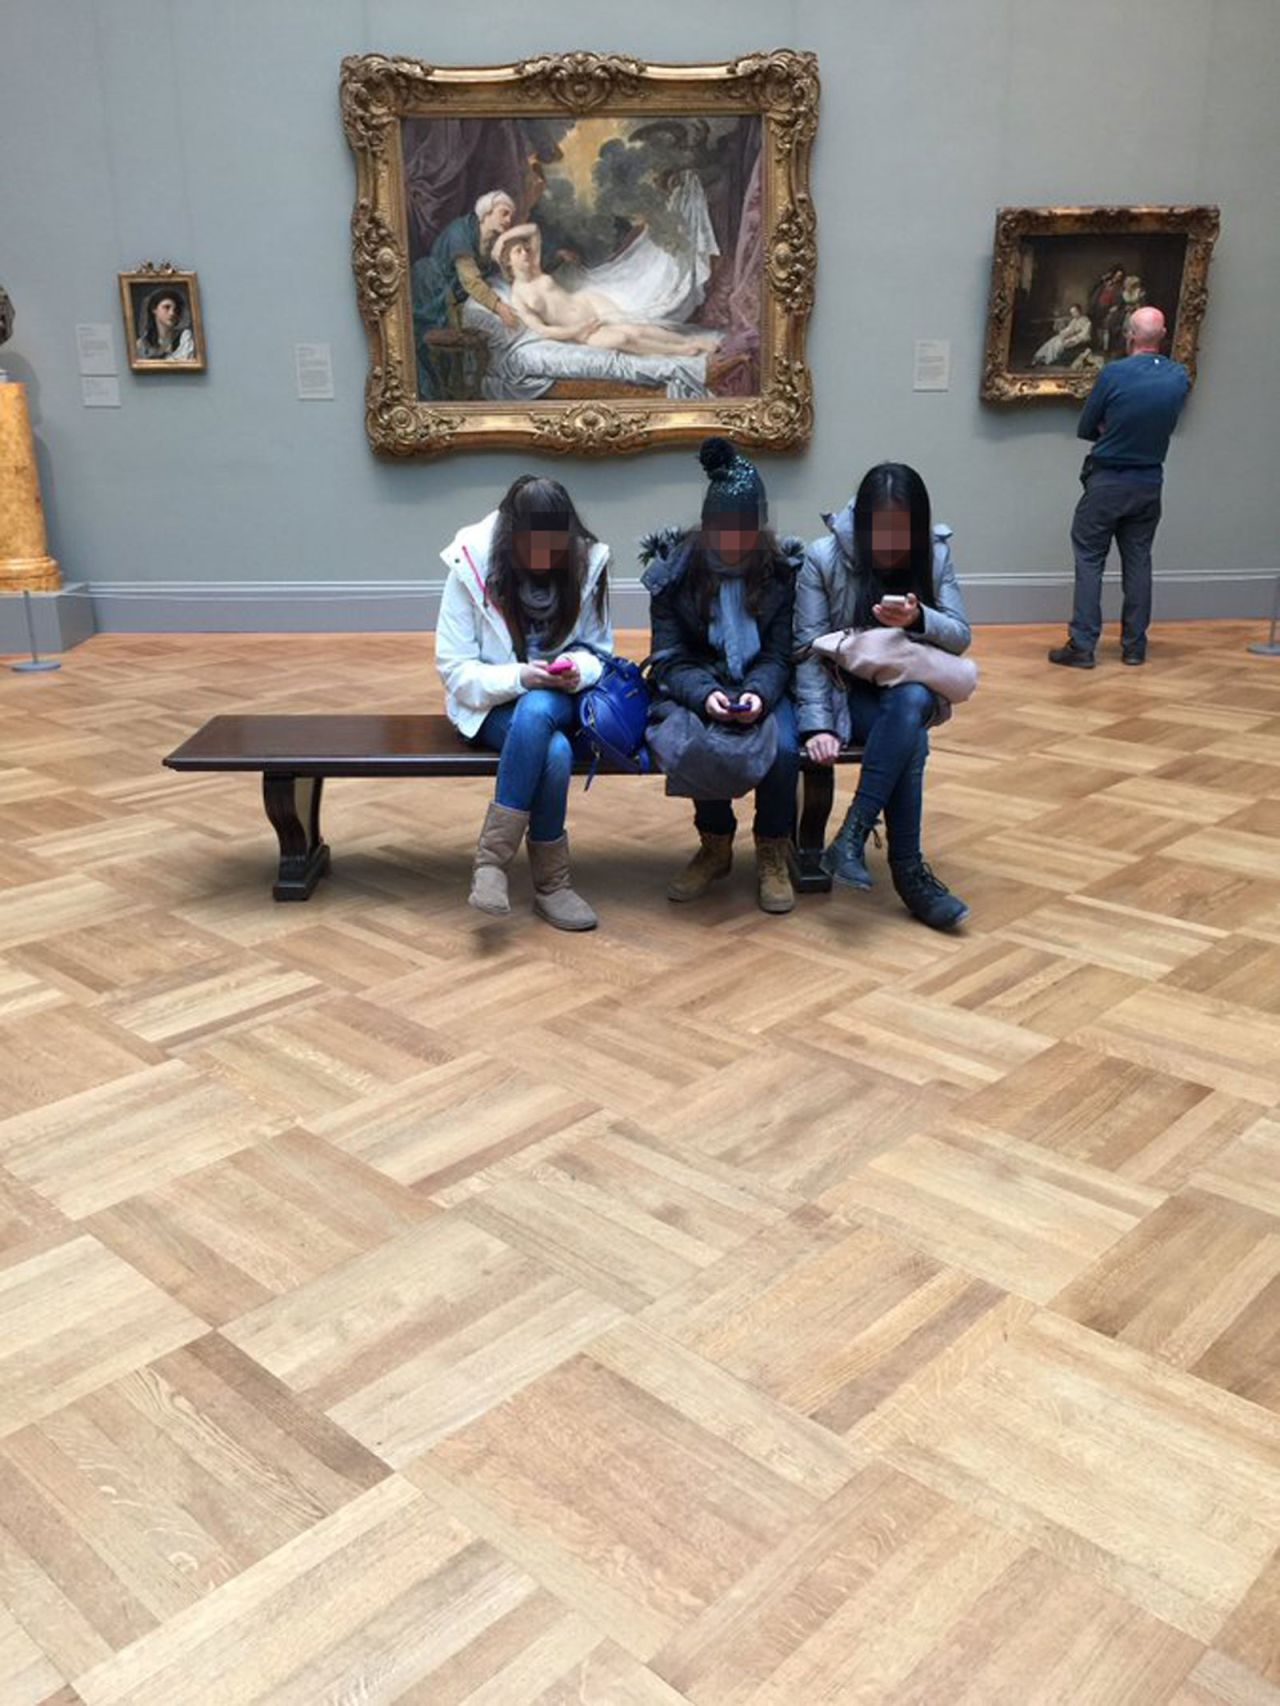 Bette Midler posted a photo of three young museumgoers on their phones. CNN blurred their faces because they appear underage.